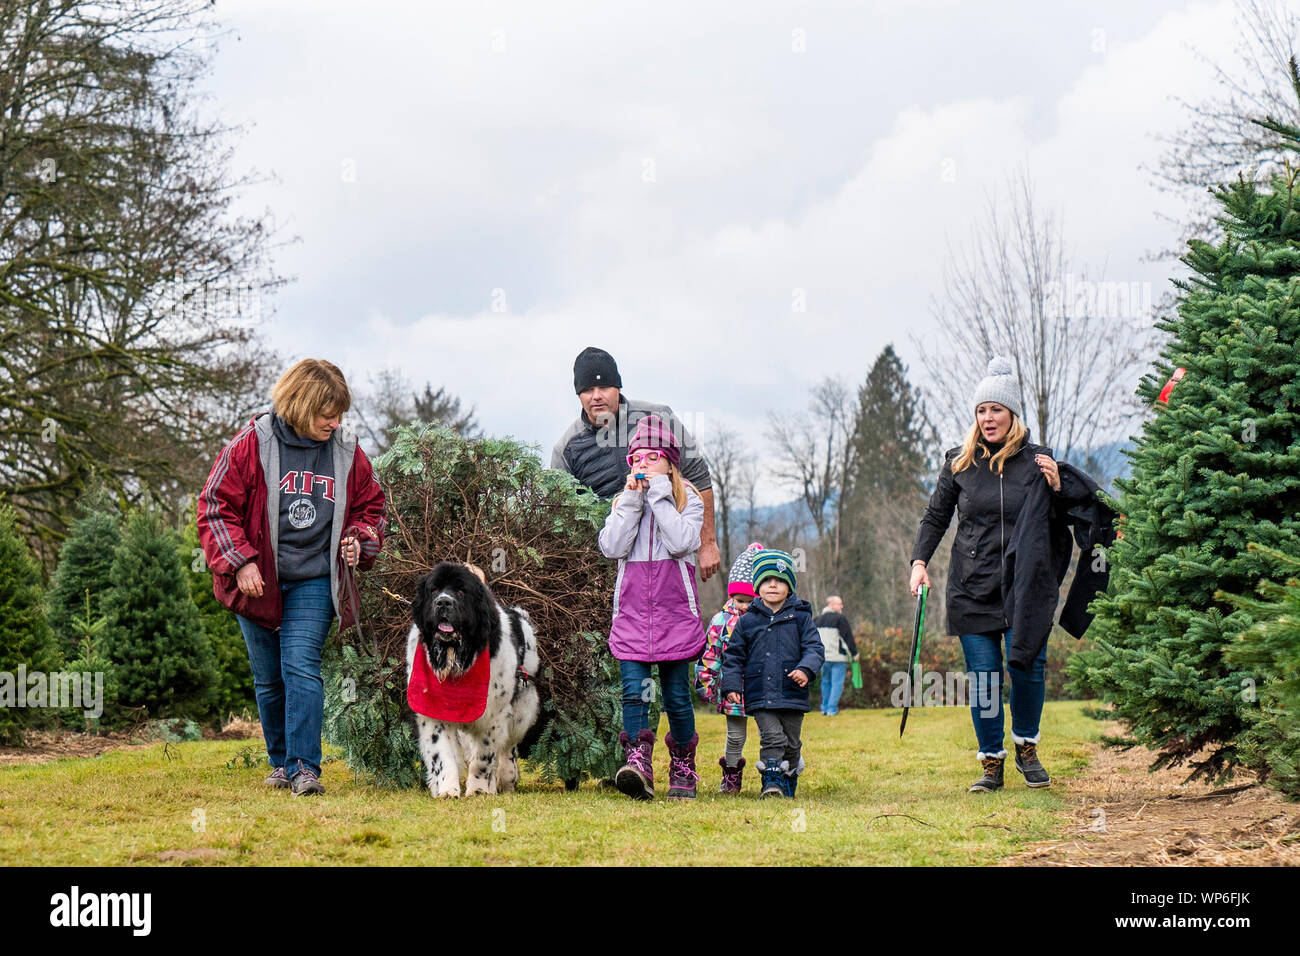 Newfoundland dog pulling Christmas tree from field for family. Stock Photo